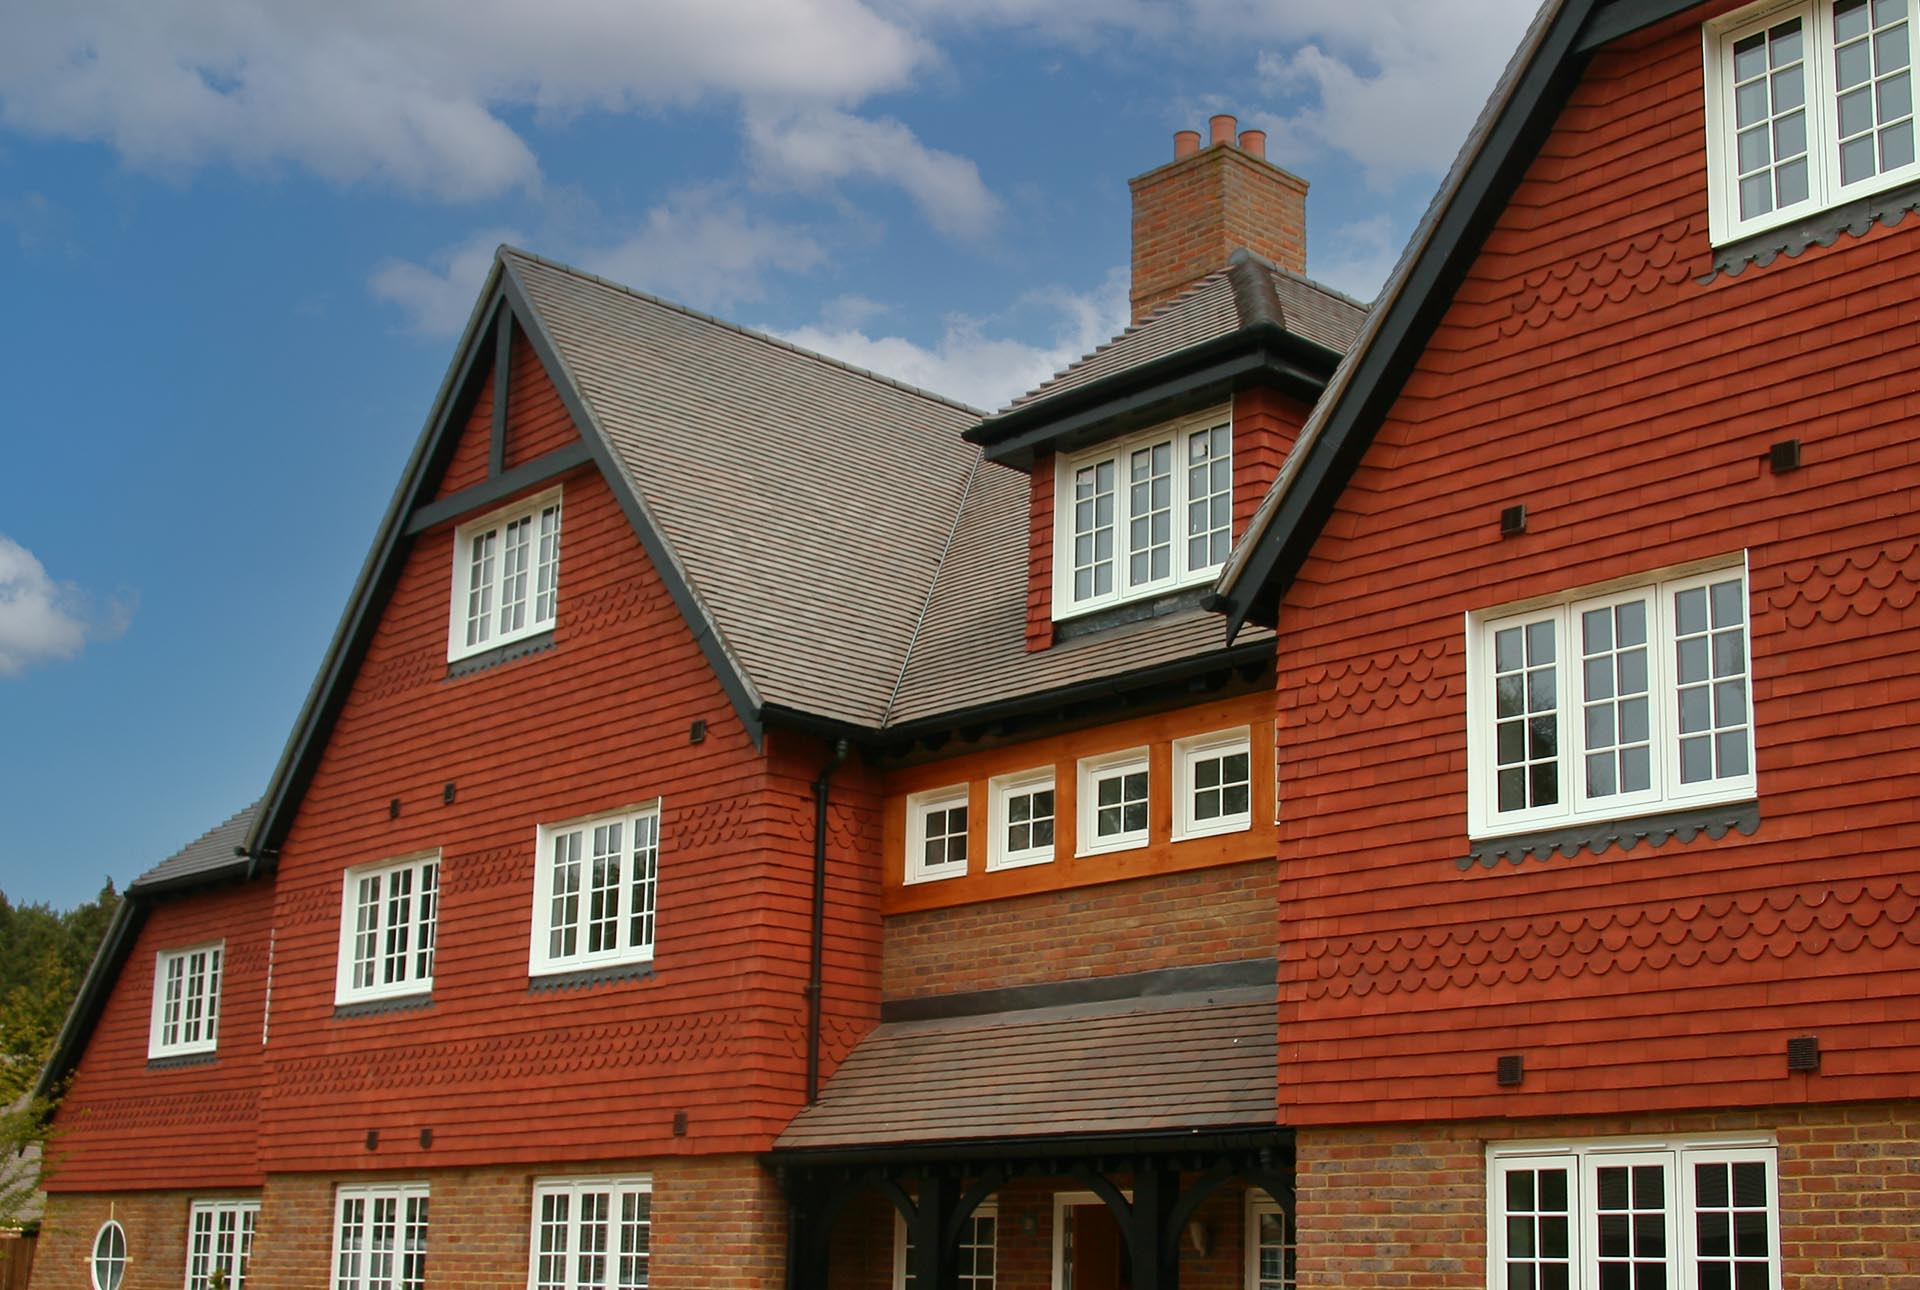 Elvira Homes luxury small development in Kingswood Surrey with Dreadnought red rustic vertical tiles